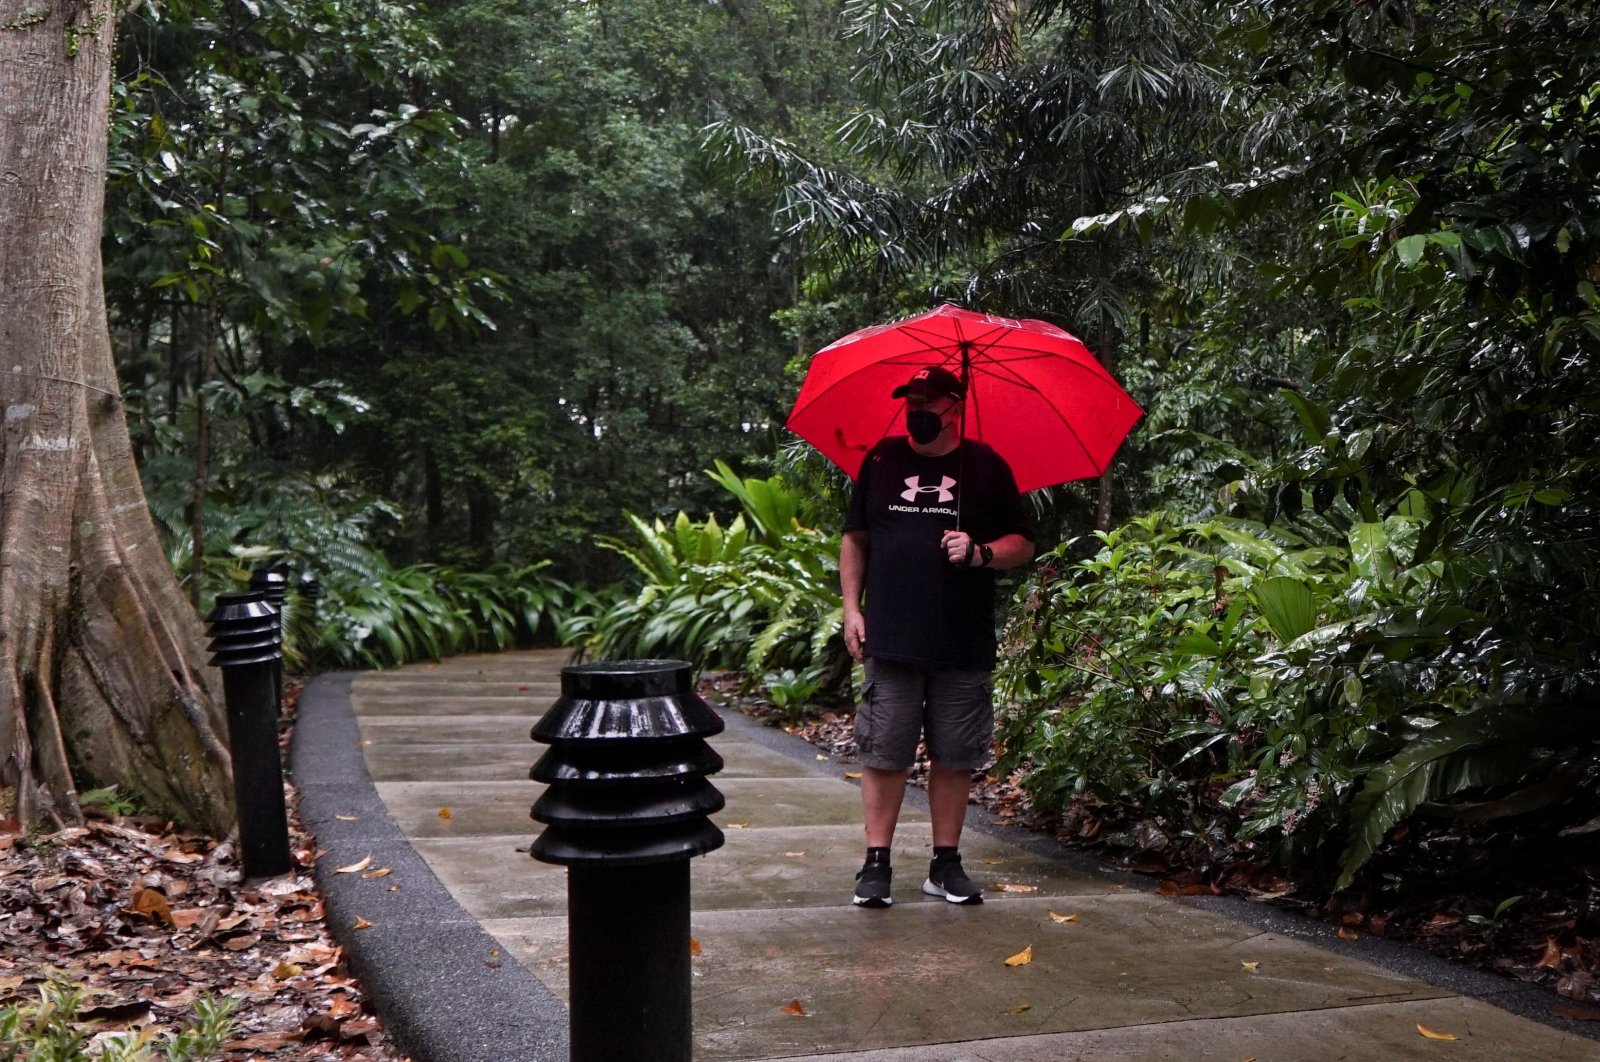 Singapore resident Graham George Spencer revisits the site where he was attacked by otters in late November, at the Singapore Botanical Gardens in Singapore, Dec. 11, 2021. (REUTERS)